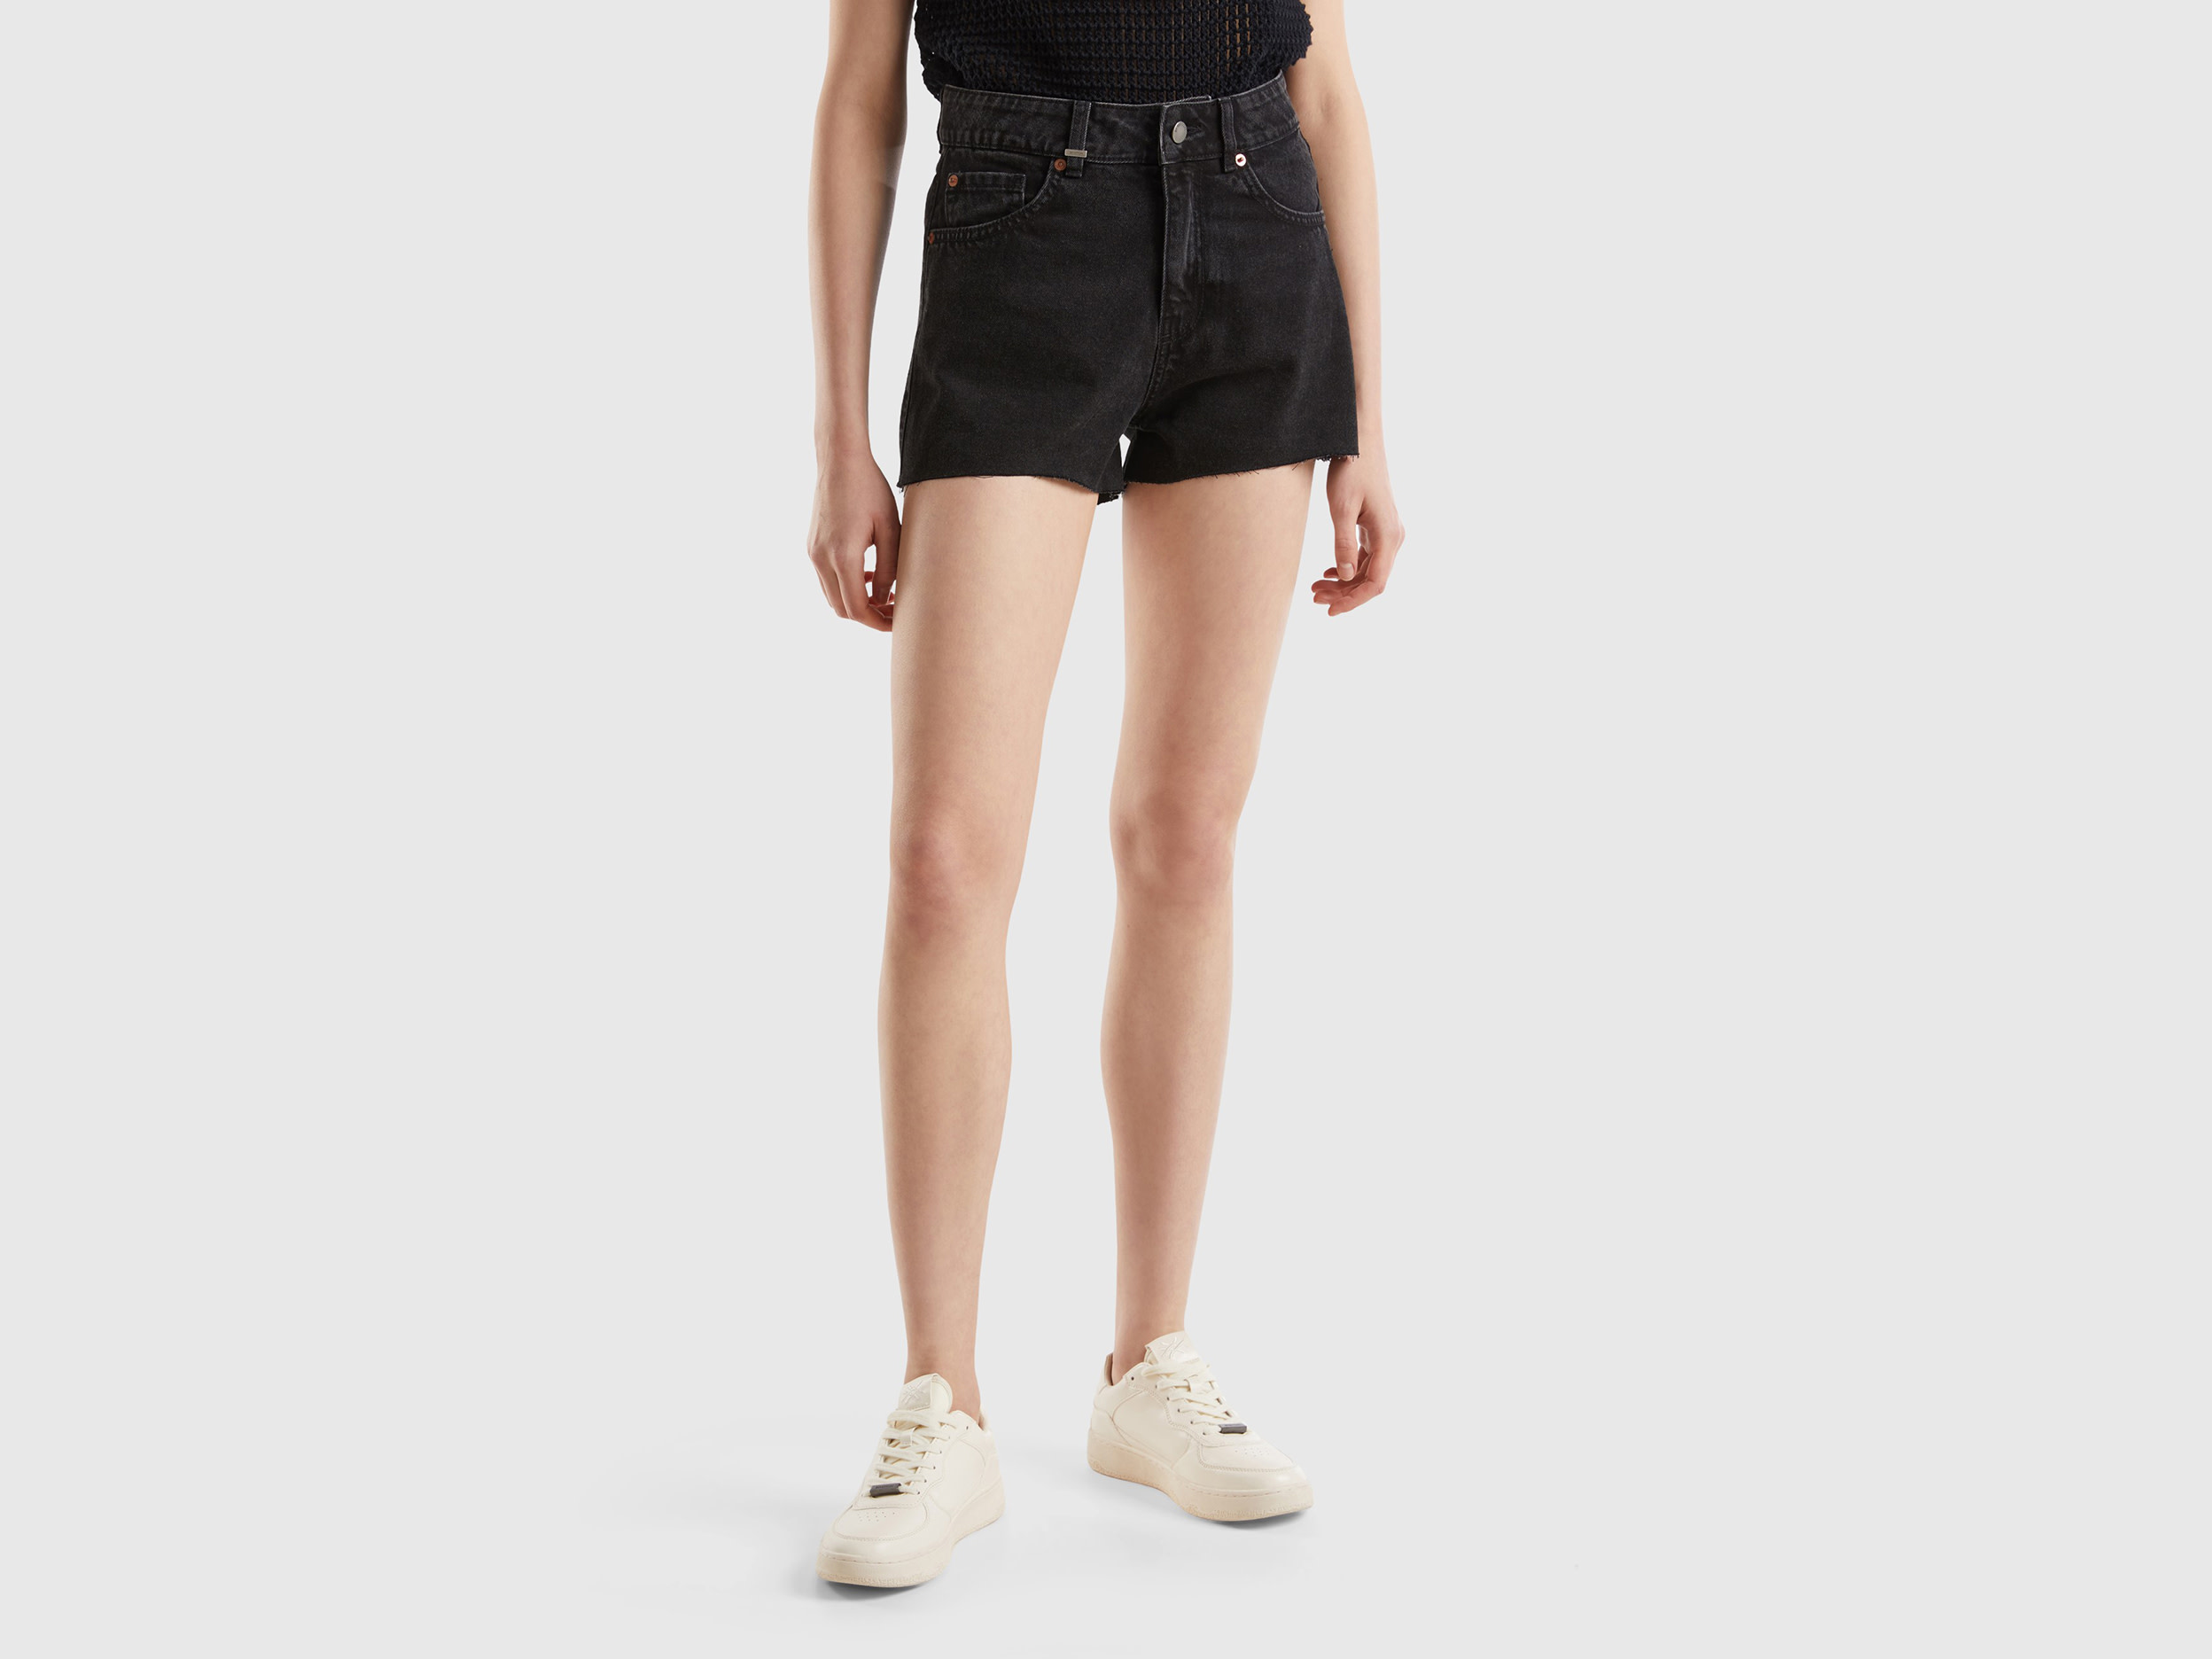 Image of Benetton, Frayed Shorts In Recycled Cotton Blend, size 34, Black, Women